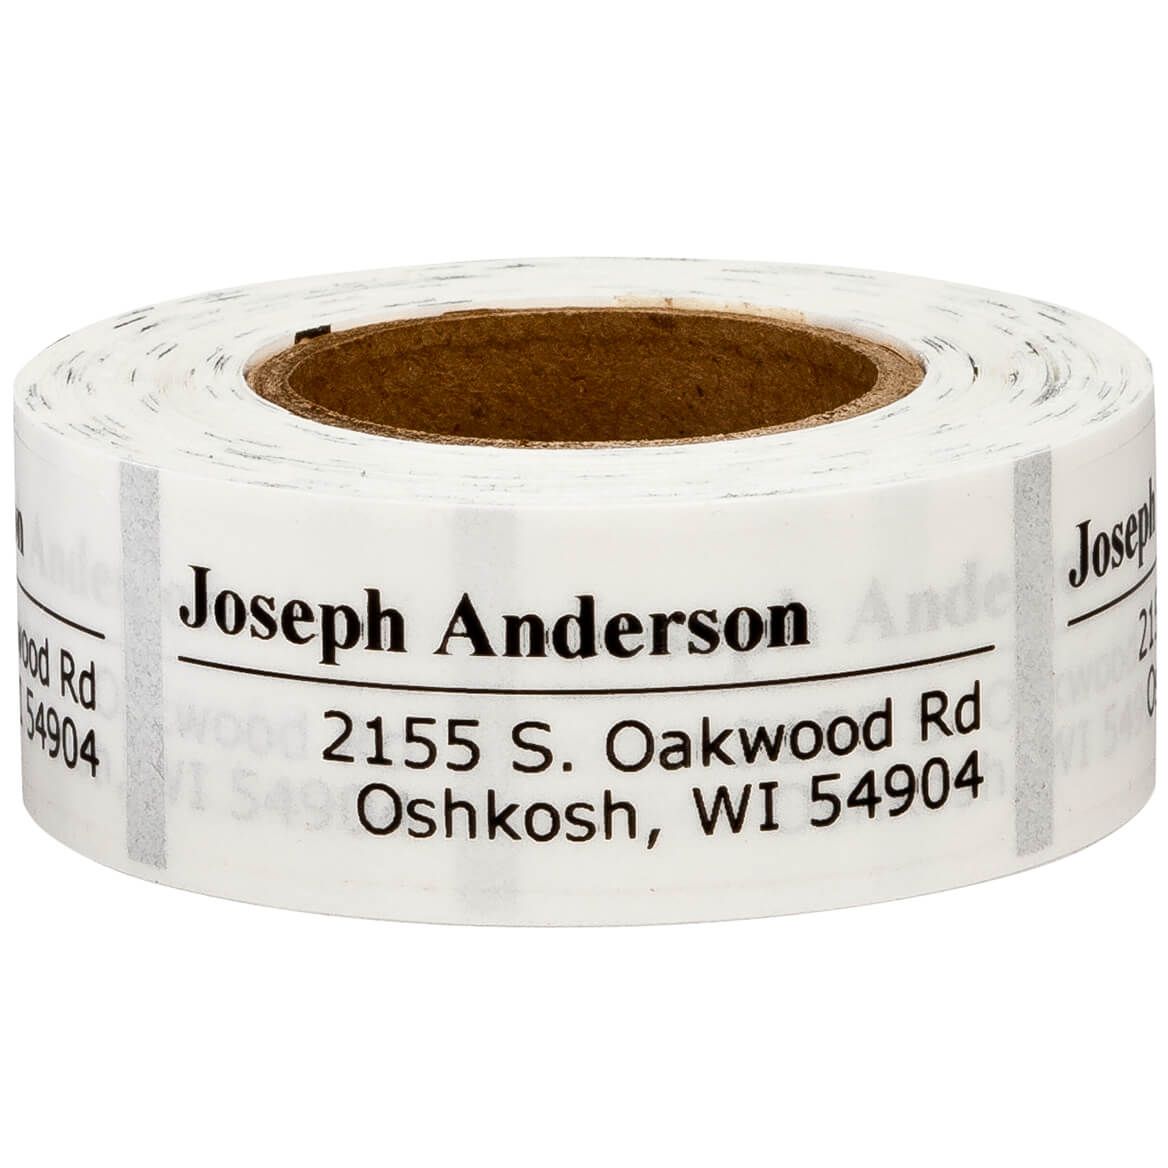 Personalized Off-Centered Address Labels, 200 + '-' + 351402